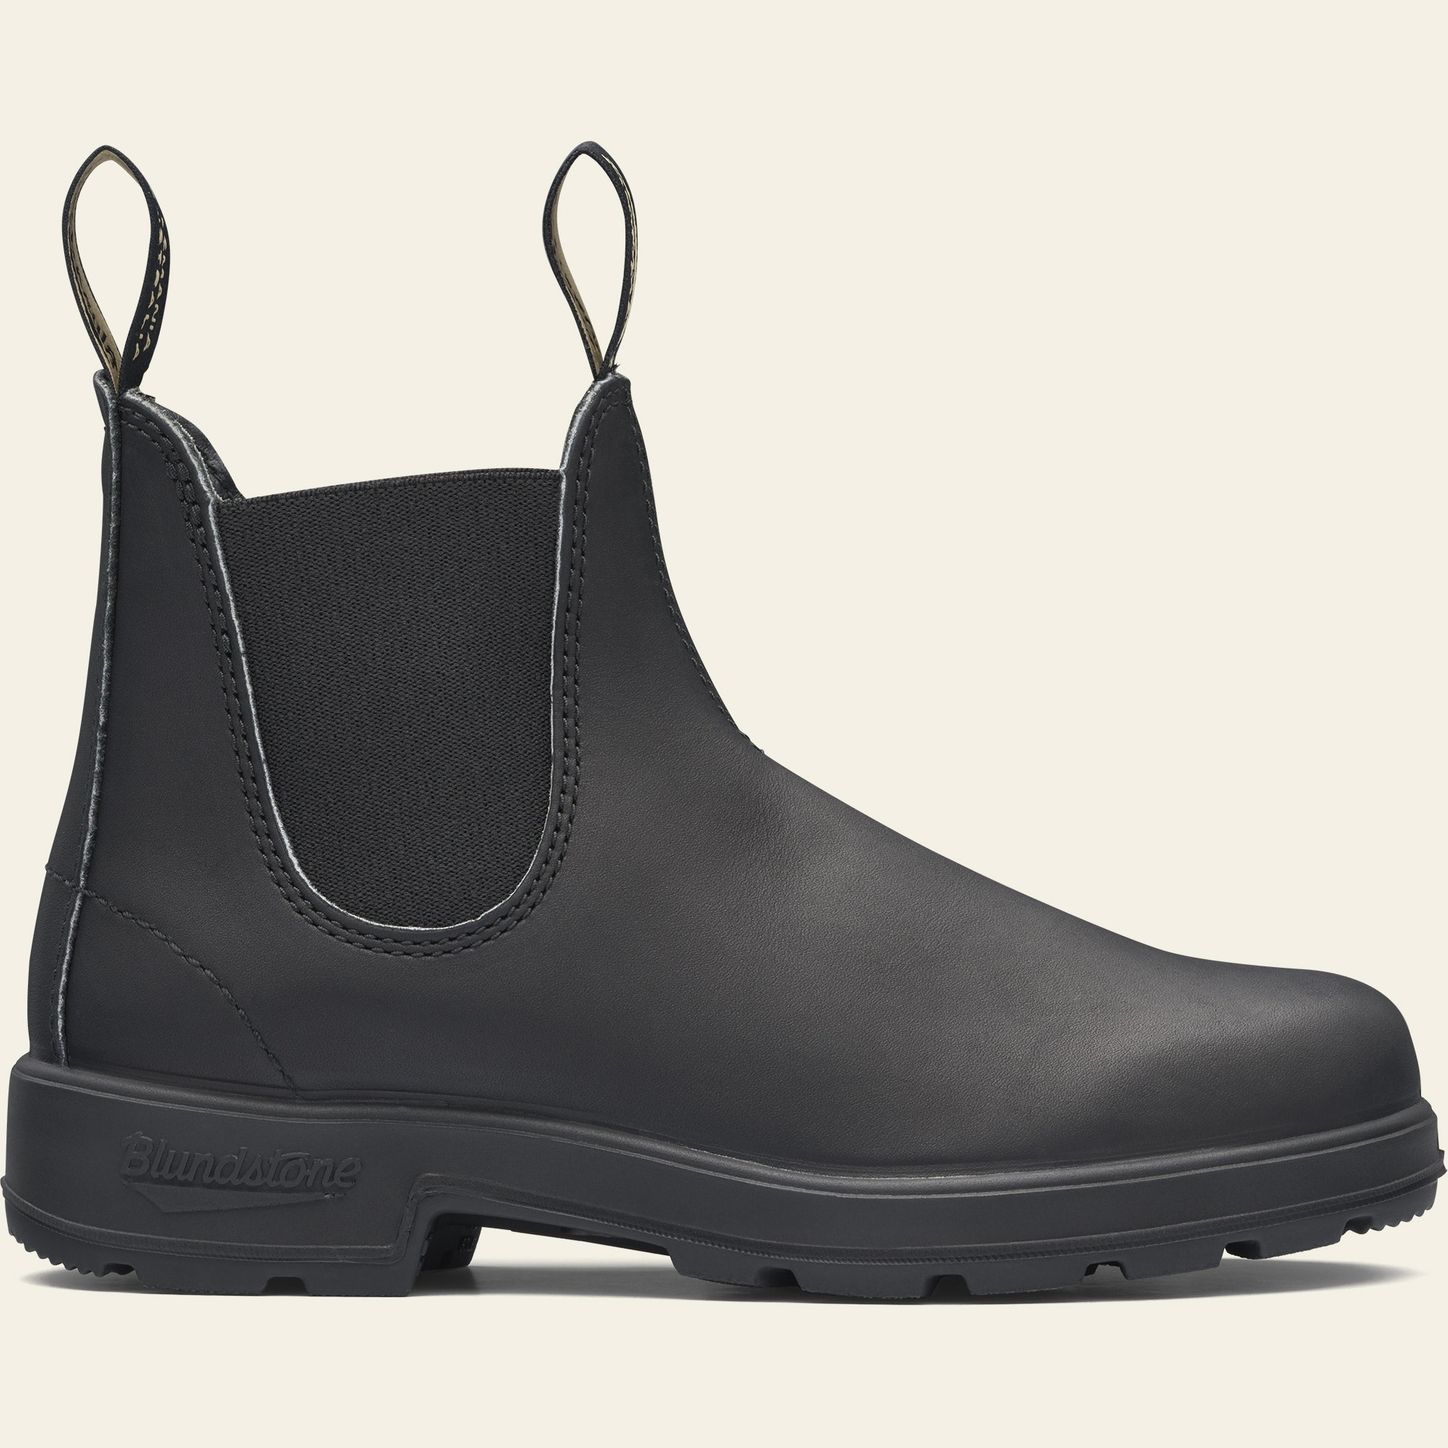 How Much Discount on Cyber Monday for Blundstones?